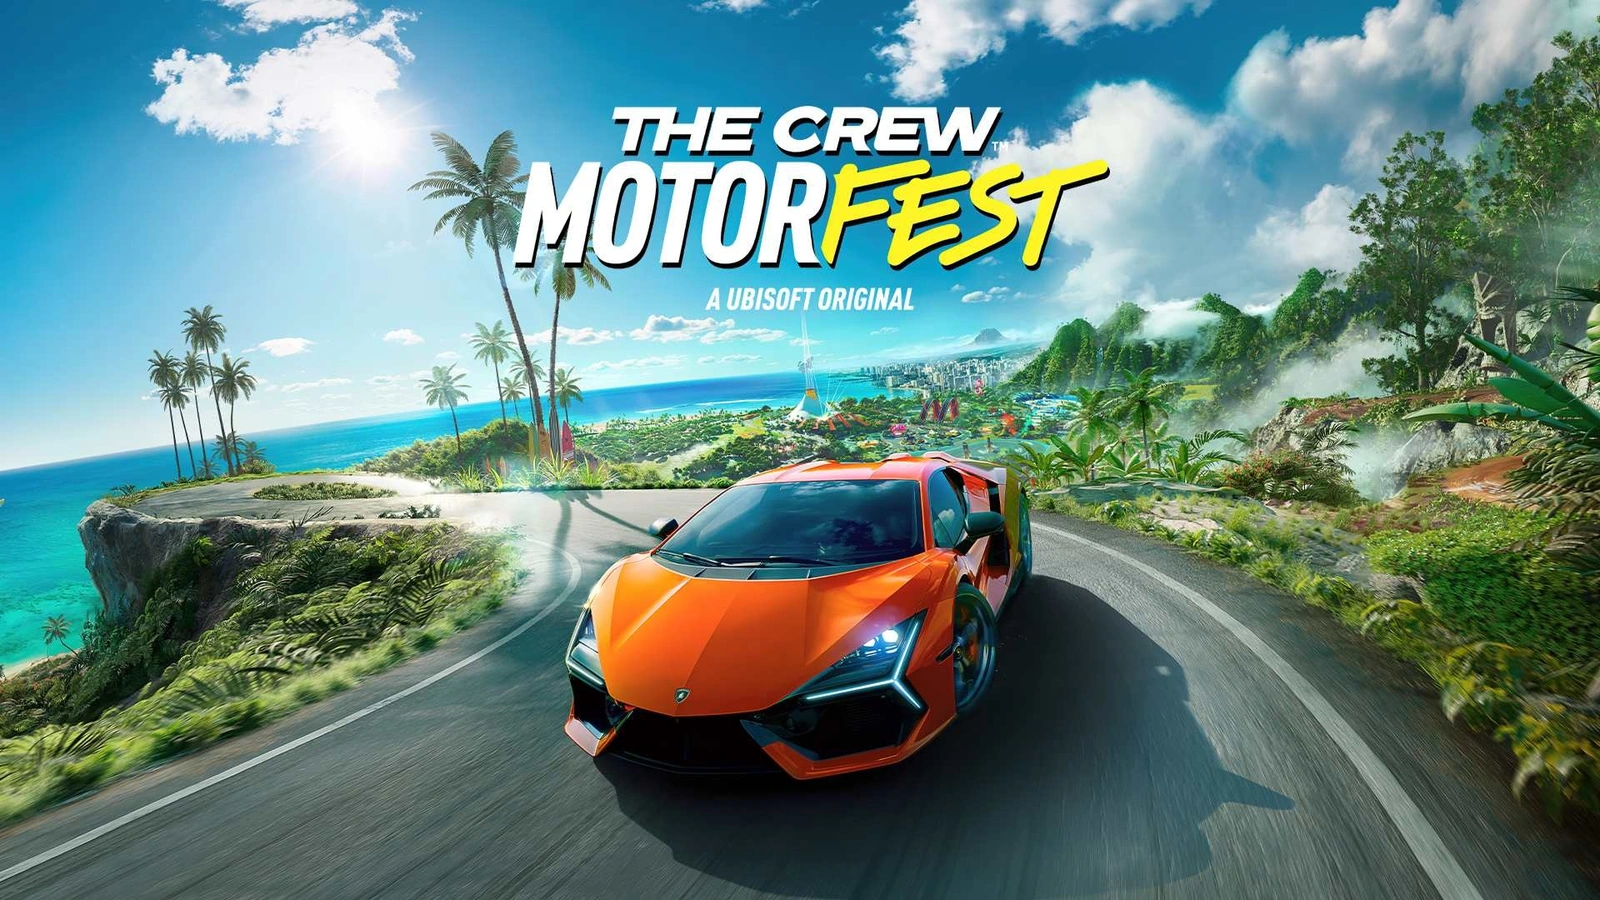 The Crew Motorfest players still can’t play with friends in co-op